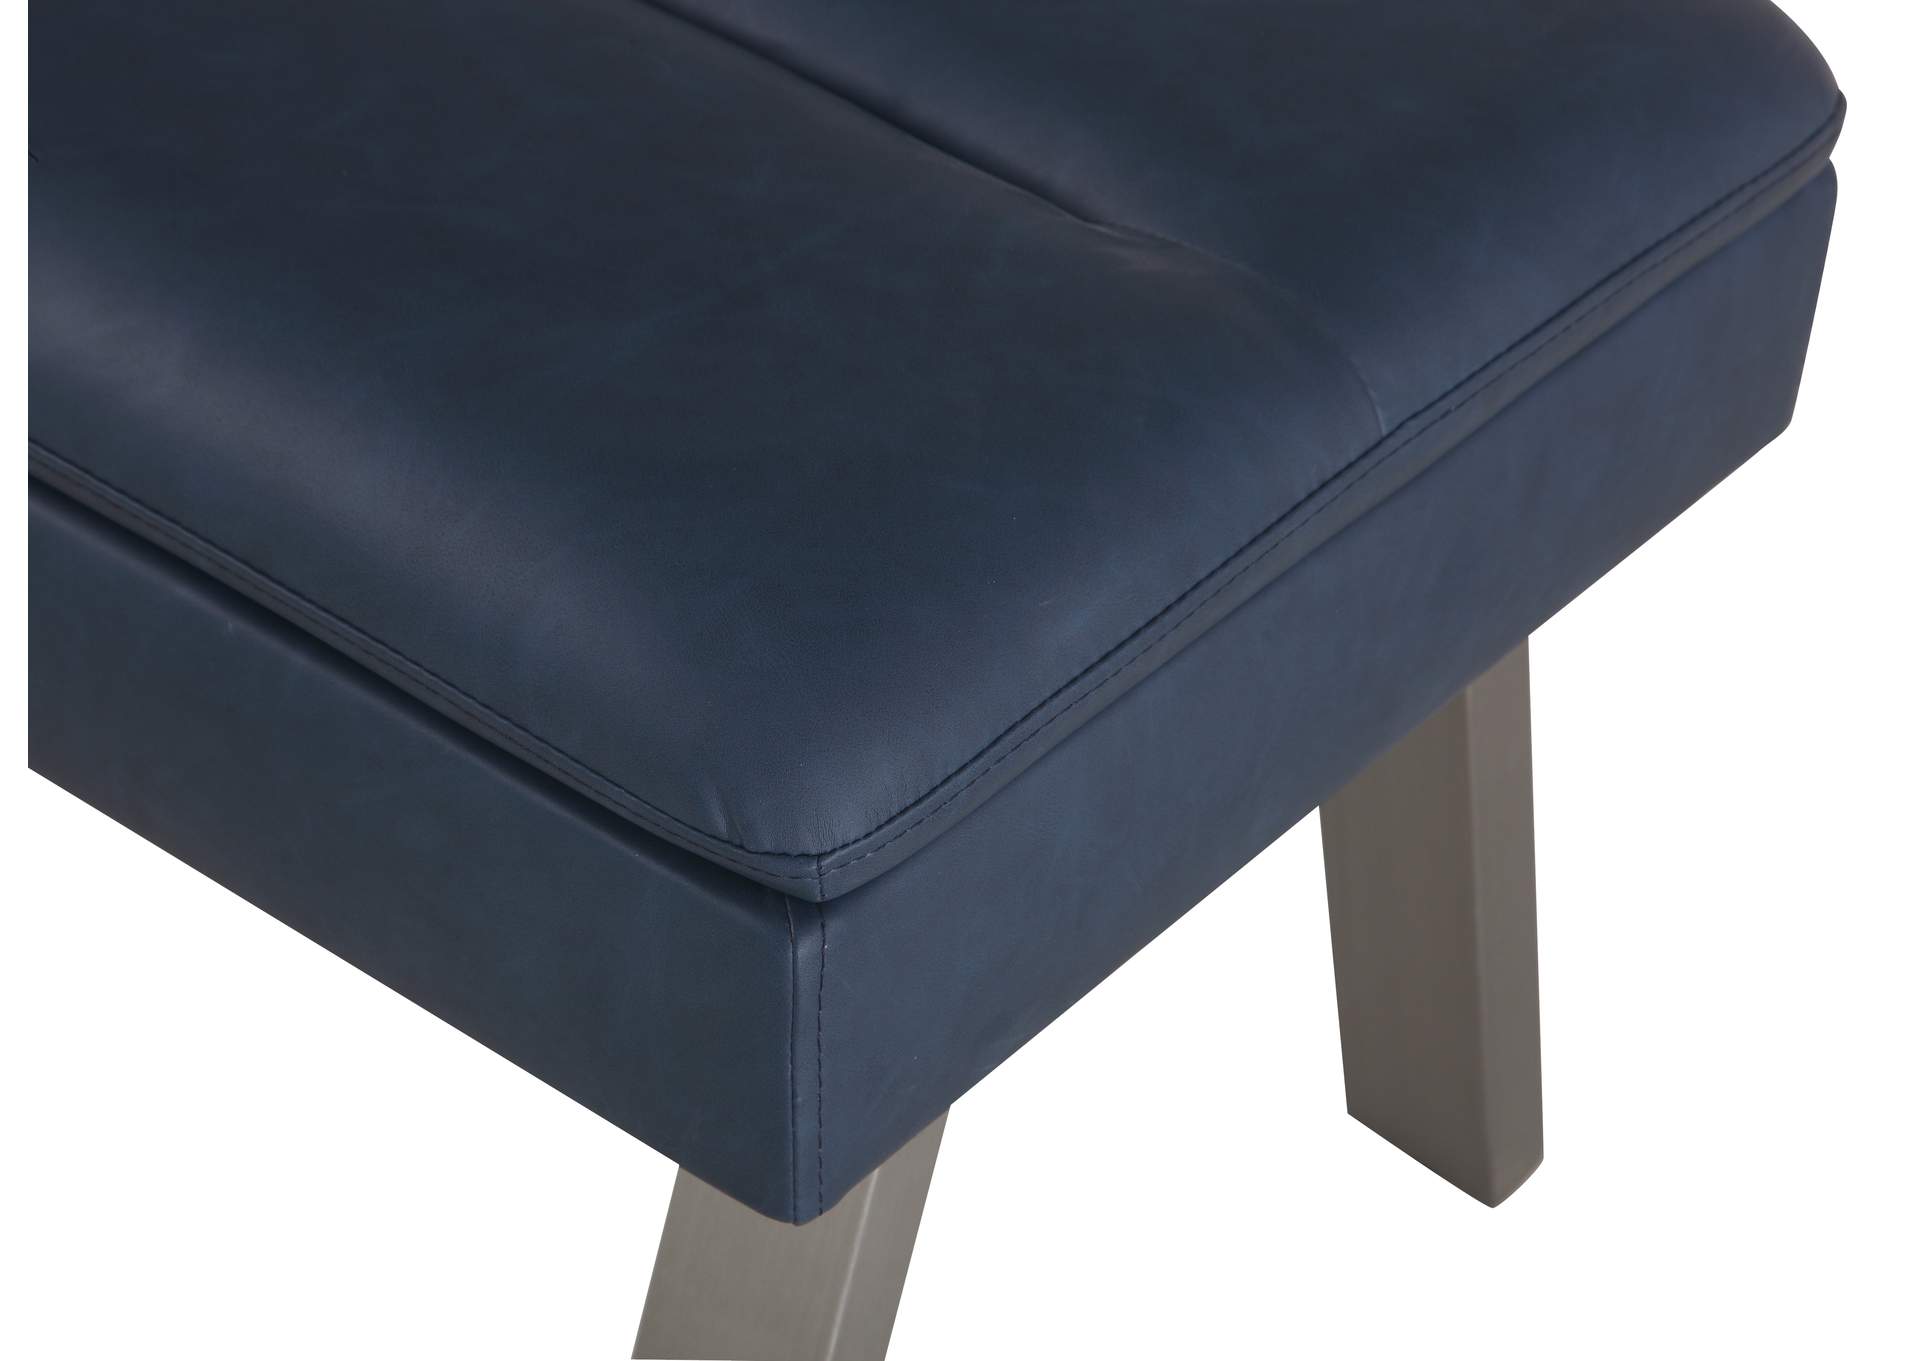 Tufted Bench w/ Underseat Storage & Steel Legs,Chintaly Imports